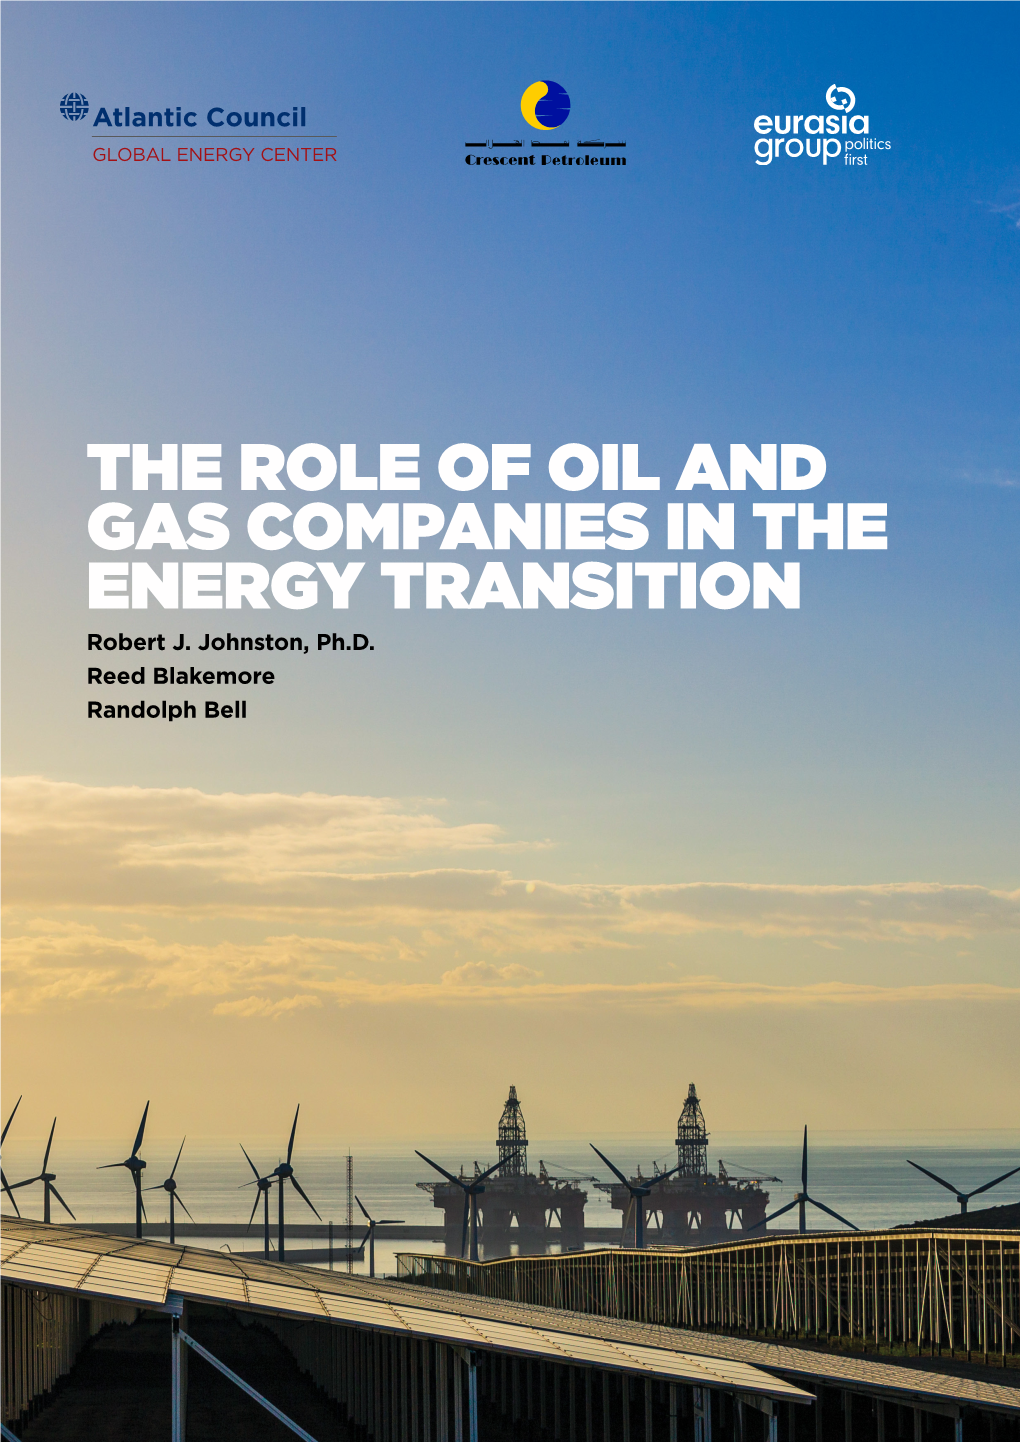 The Role of Oil and Gas Companies in the Energy Transition